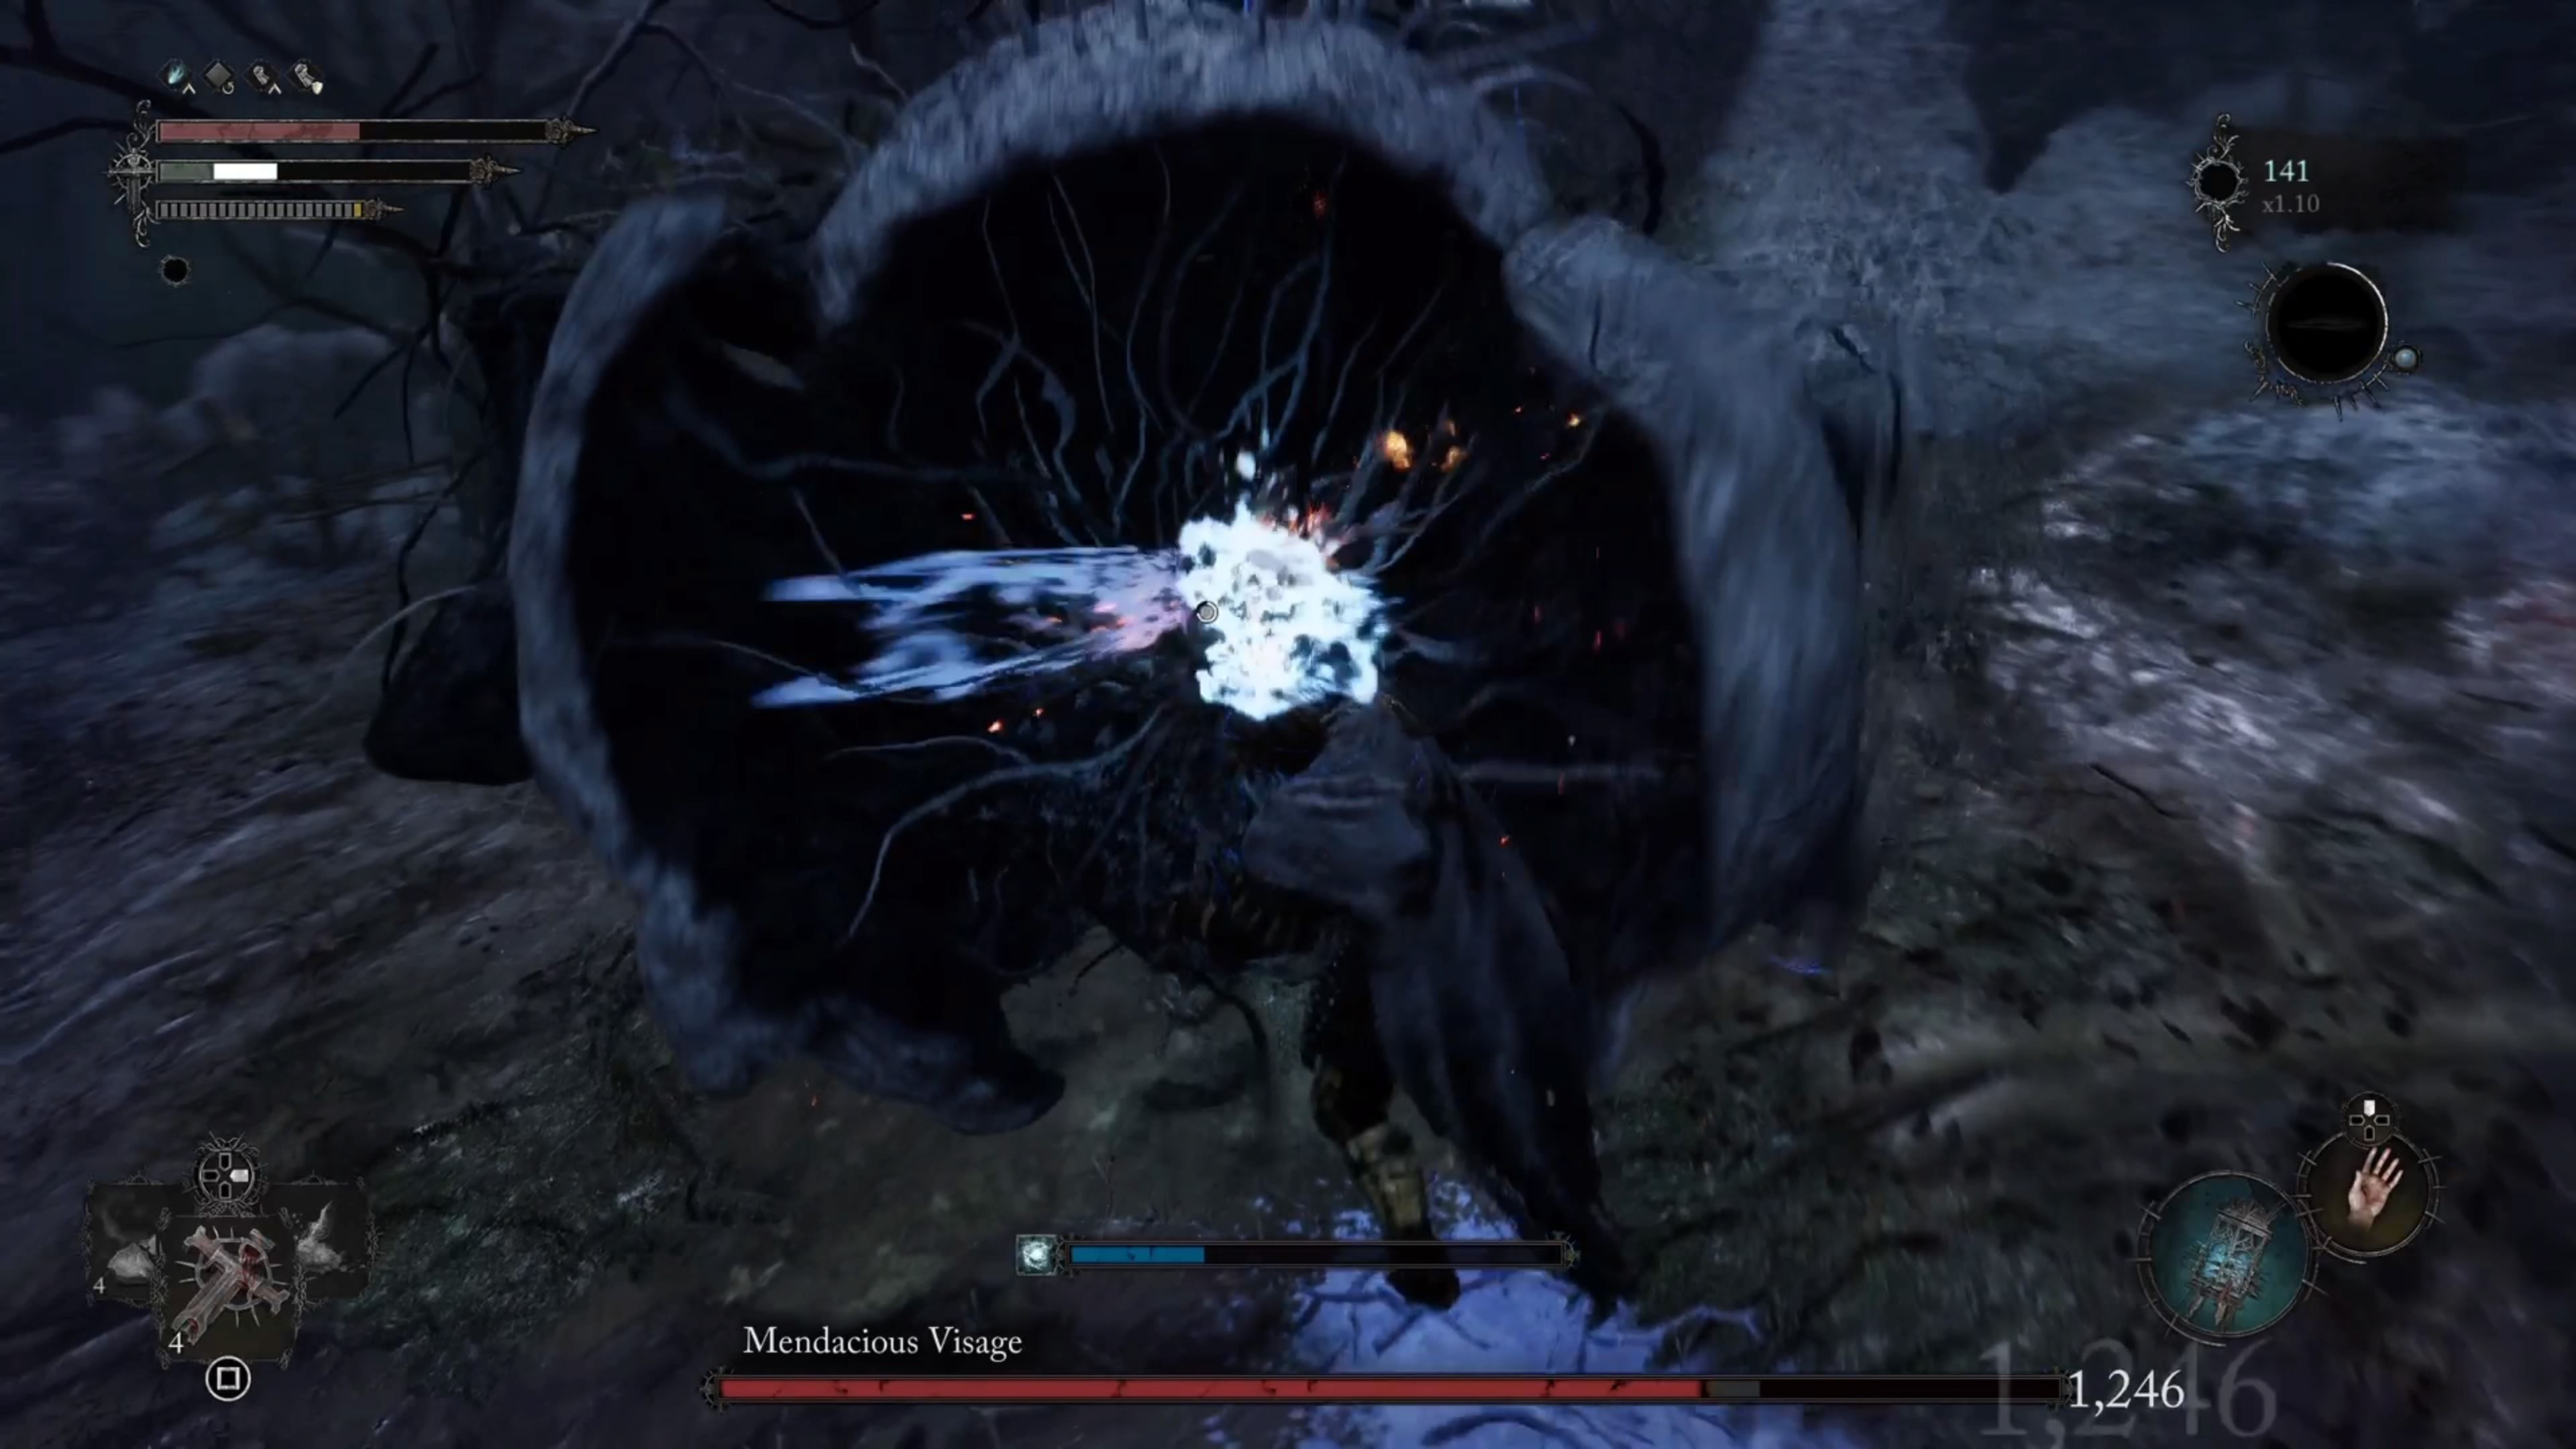 performing visceral attacks on Mendacious Visage Boss in Lords of the Fallen